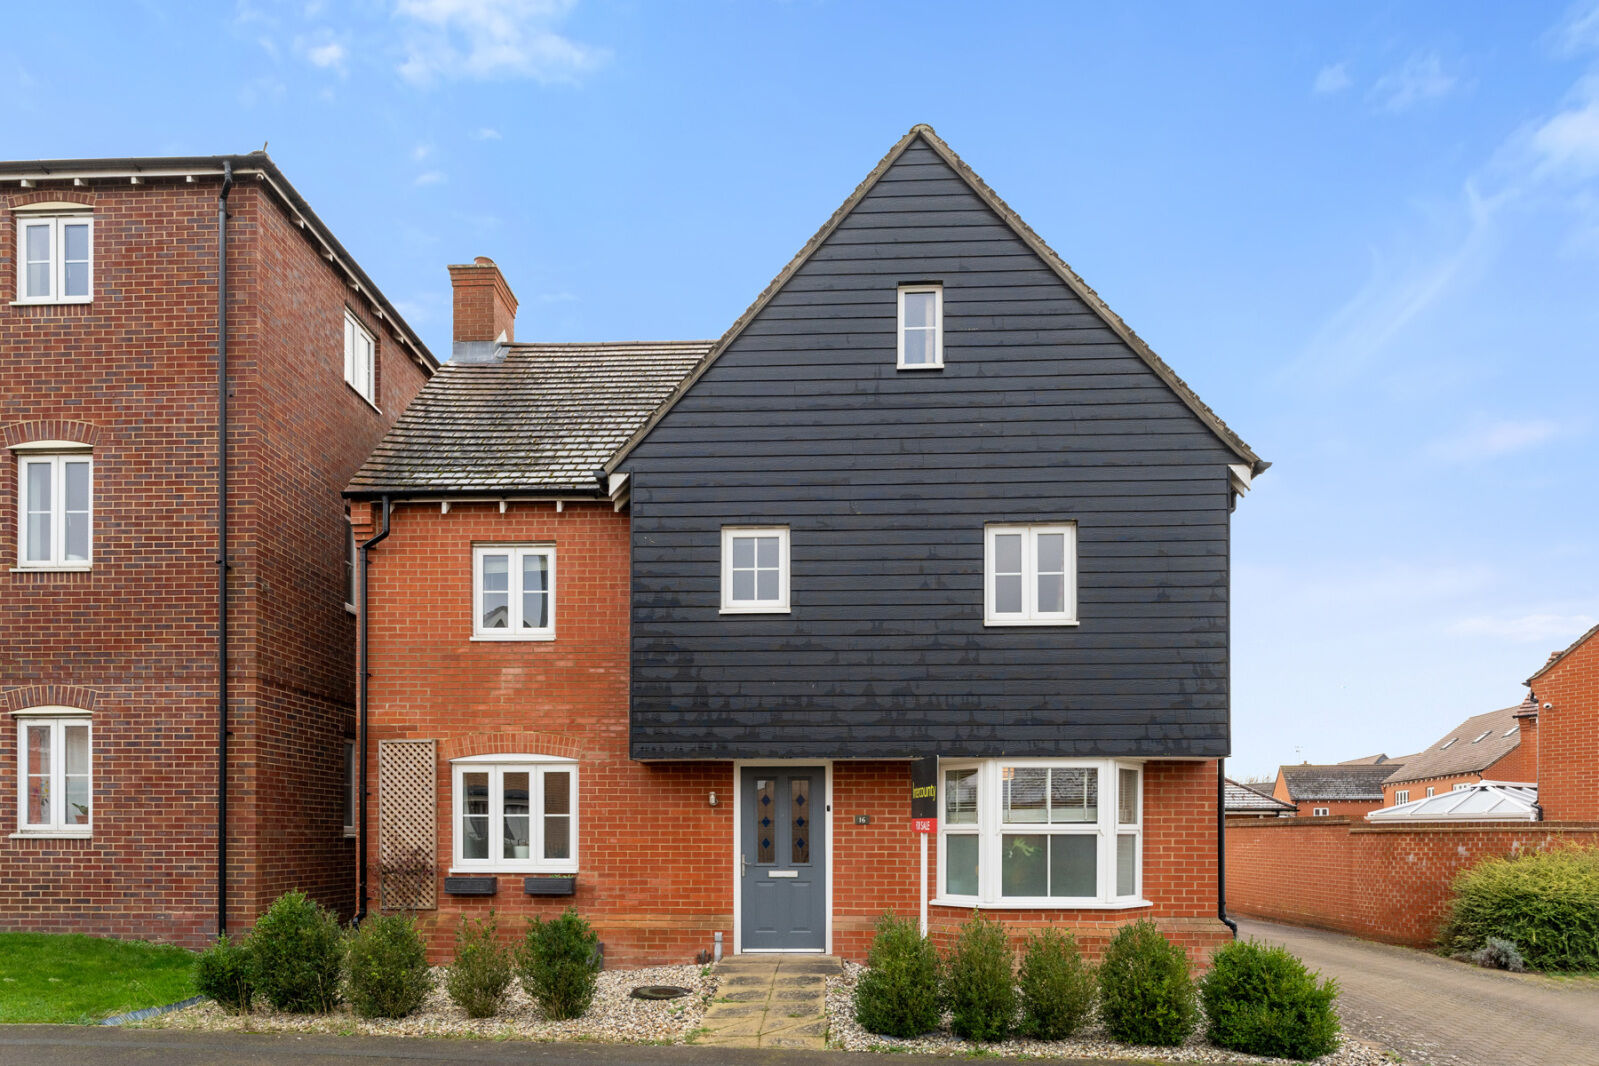 4 bedroom detached house for sale Walson Way, Stansted, CM24, main image